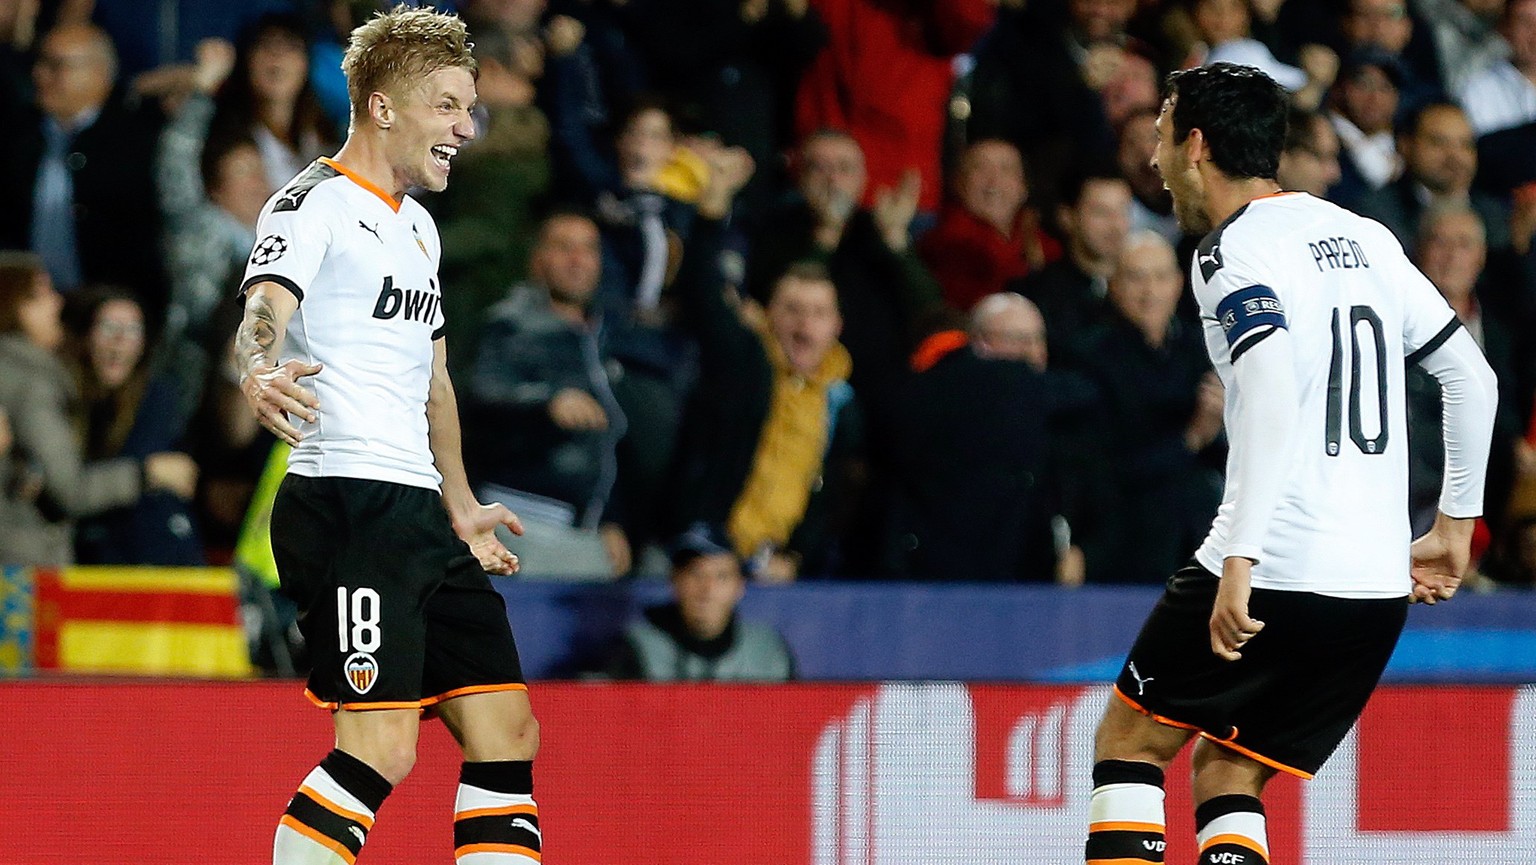 epa08029602 Valencia's players Dani Parejo (R) and teammate Daniel Wass (L) react during the UEFA Champions League group H soccer match between Valencia CF and Chelsea FC at Mestalla stadium in Valenc ...